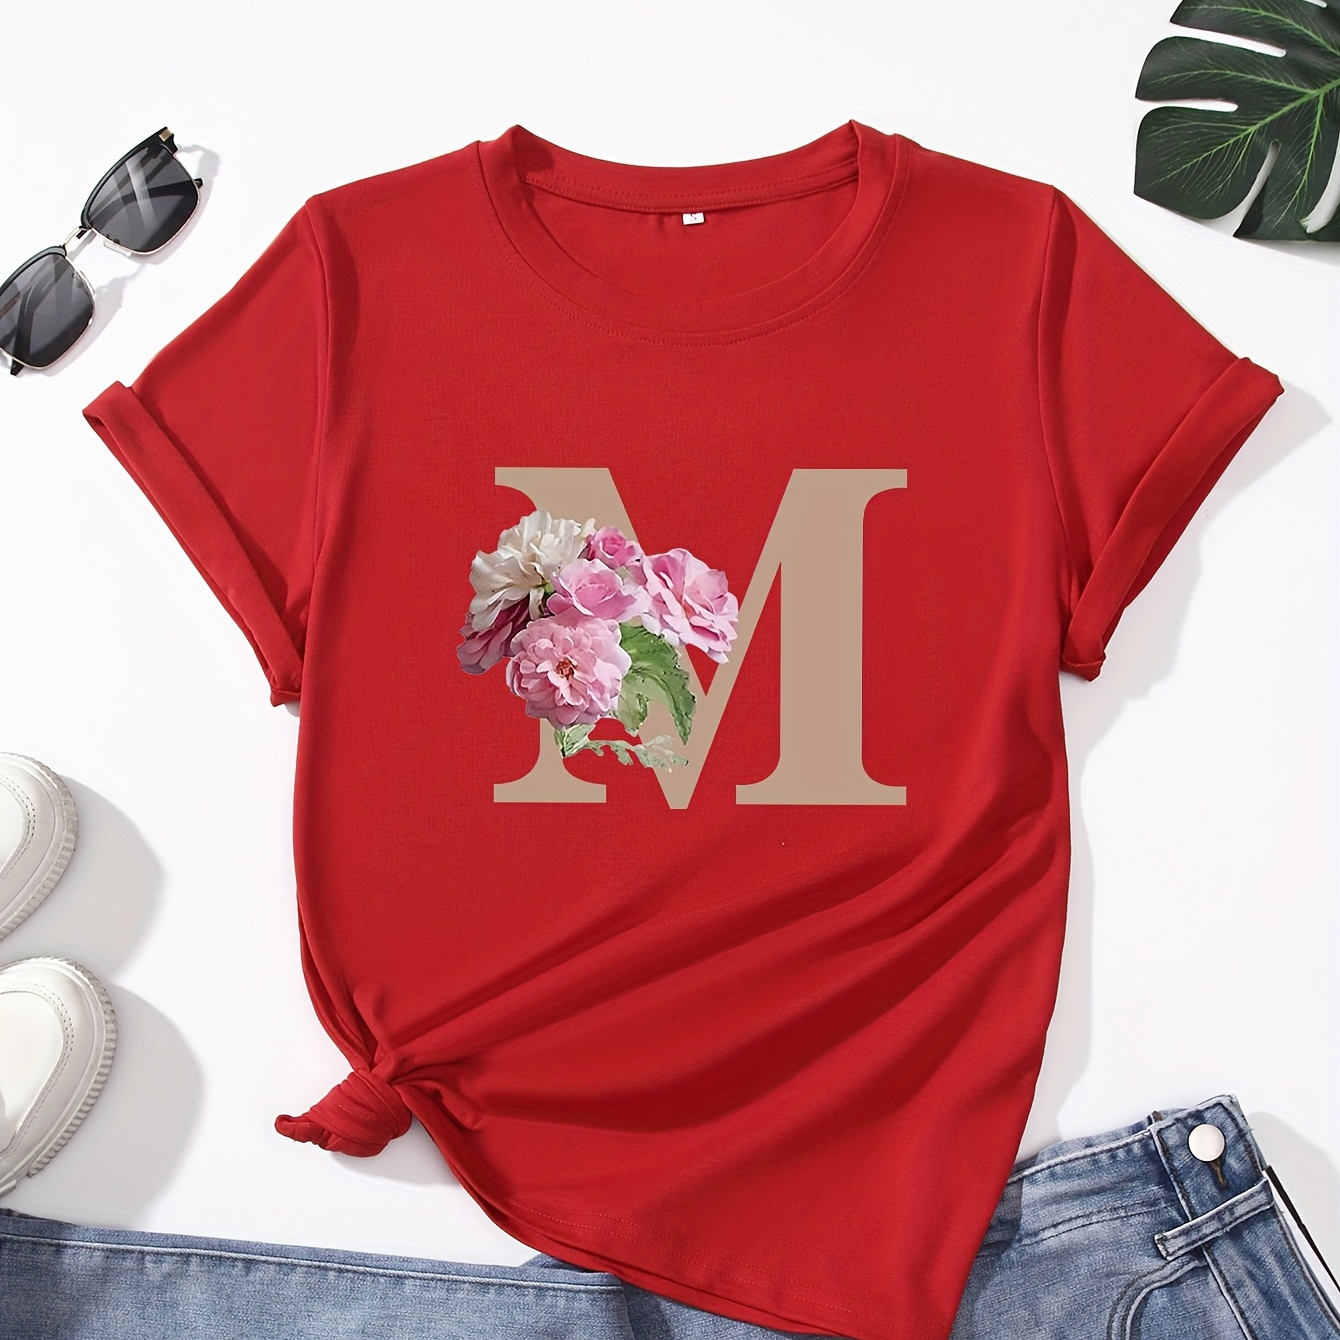 

Letter & Floral Print T-shirt, Casual Crew Neck Short Sleeve Top For Spring & Summer, Women's Clothing